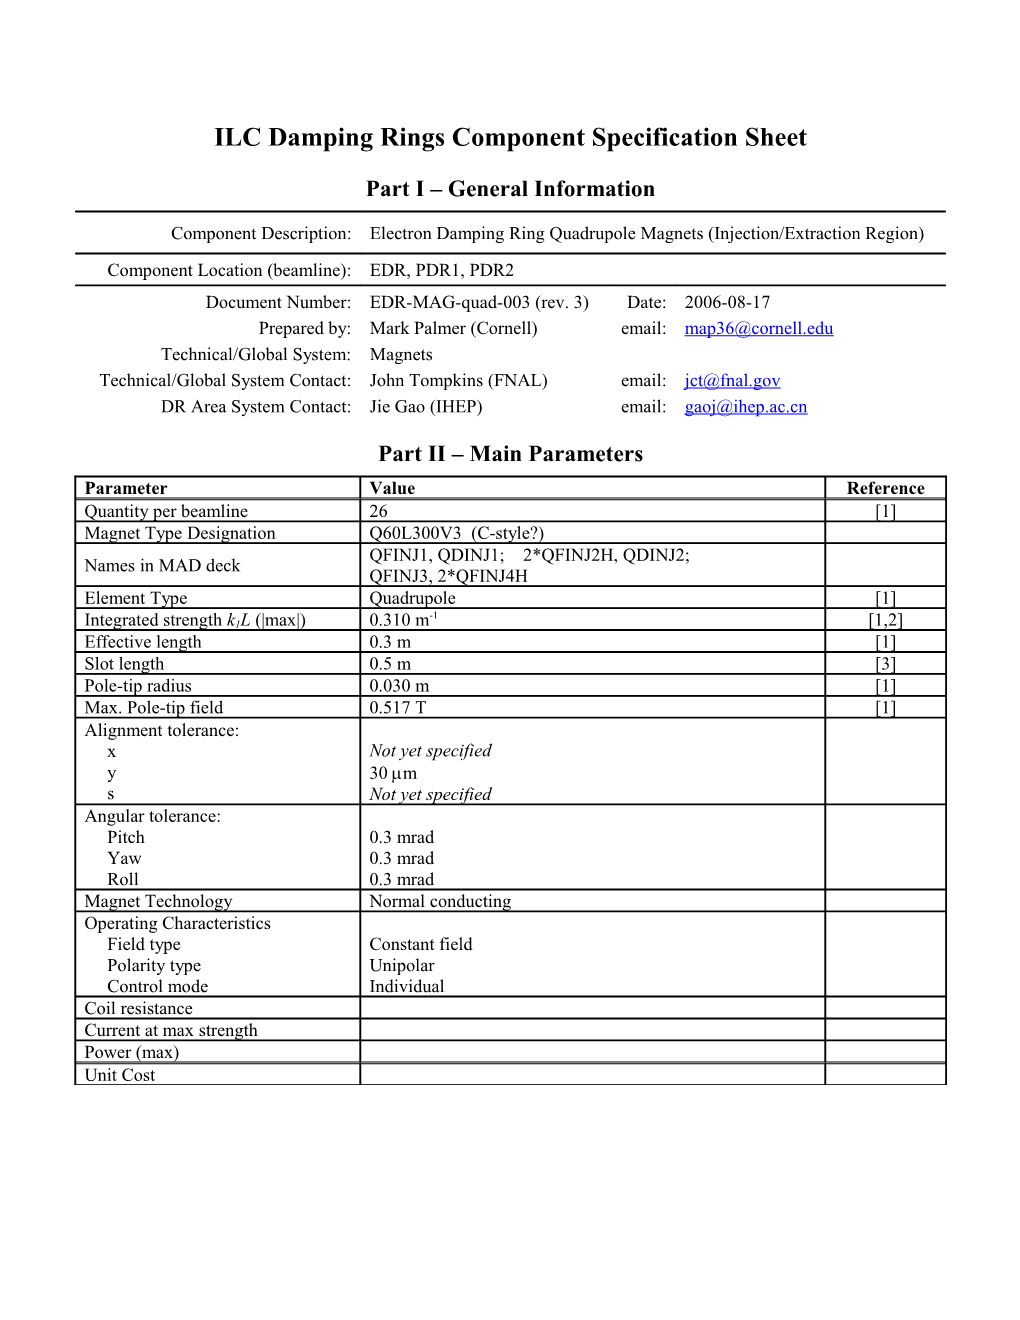 ILC Damping Rings Component Specification Sheet